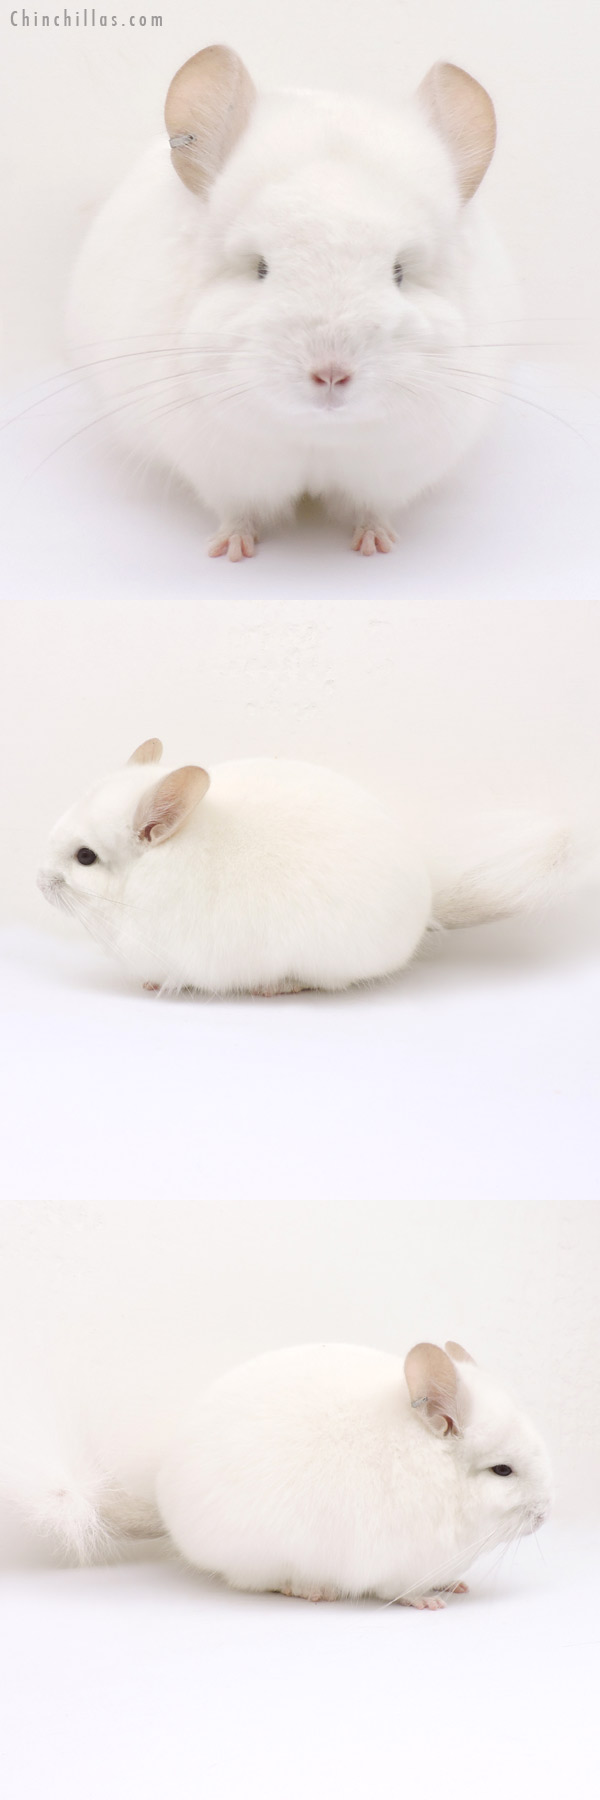 Chinchilla or related item offered for sale or export on Chinchillas.com - 14212 Exceptional Pink White  Royal Persian Angora Male Chinchilla